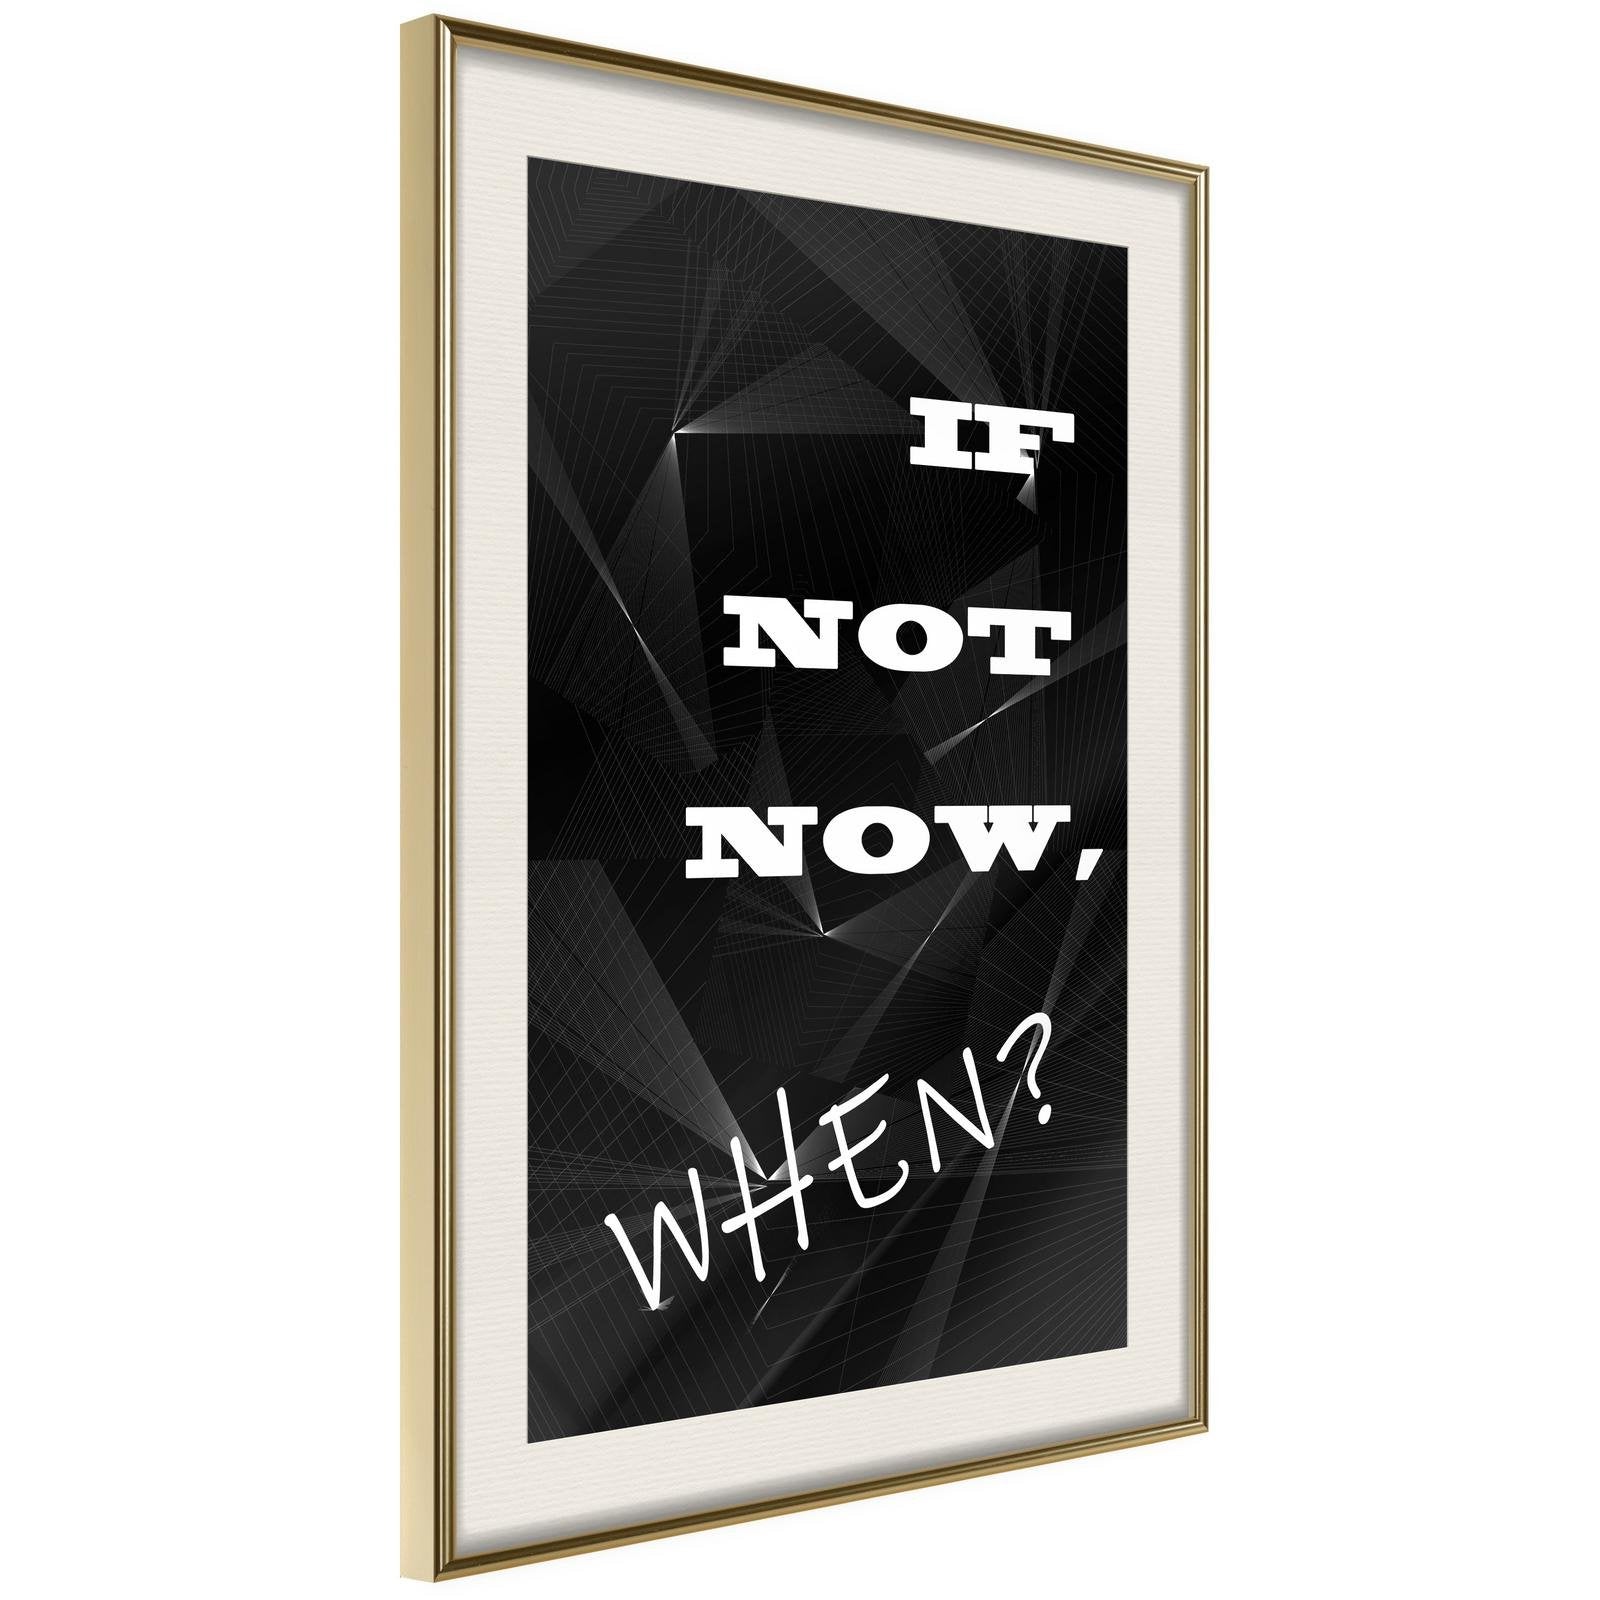 Inramad Poster / Tavla - When?-Poster Inramad-Artgeist-20x30-Guldram med passepartout-peaceofhome.se